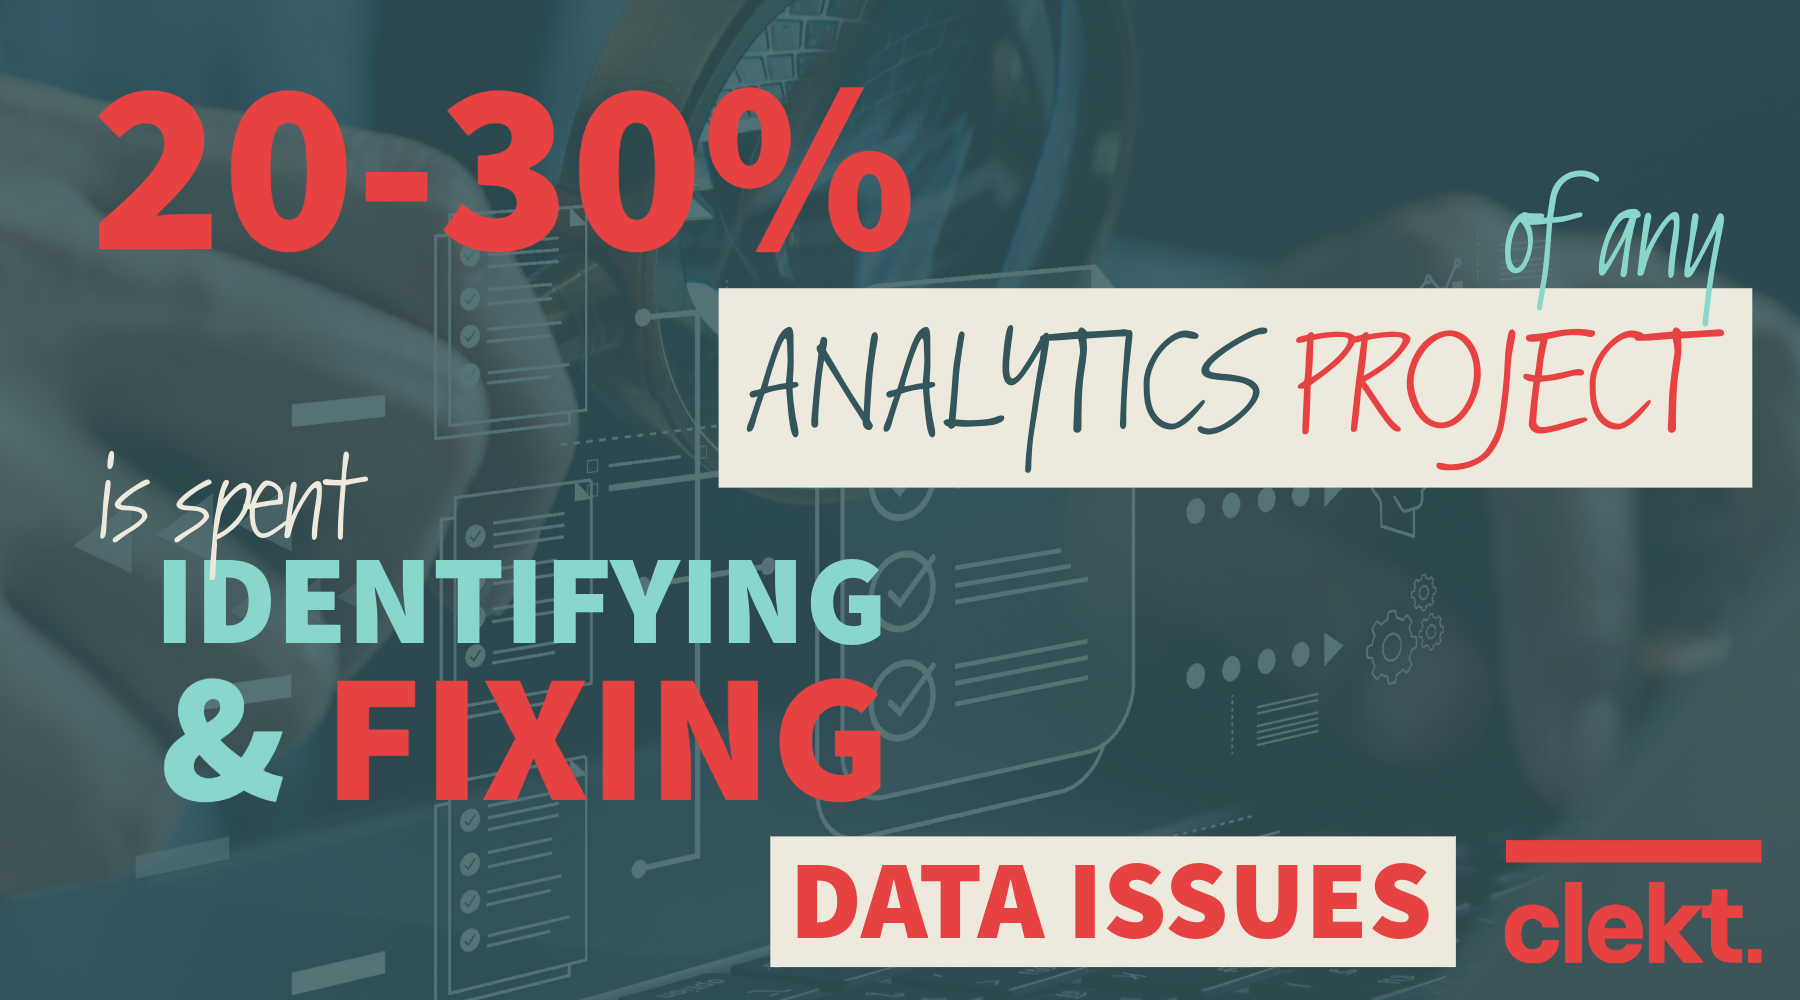 quote stating "20-30% of any analytics and reporting project is spent identifying and fixing data issues"